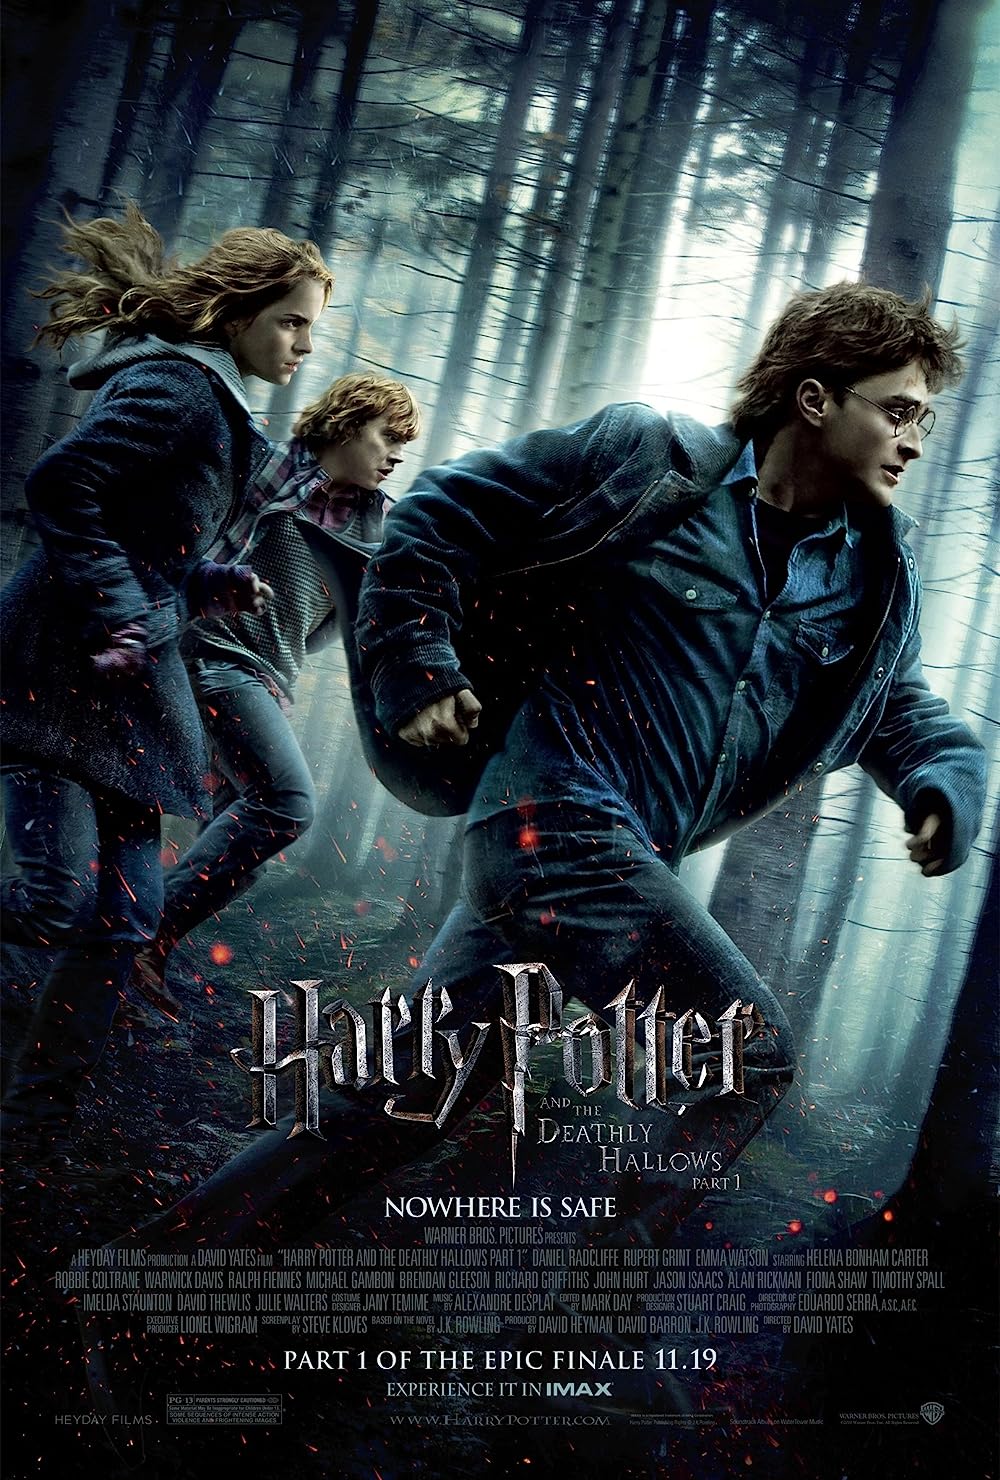 FULL MOVIE: Harry Potter and the Deathly Hallows: Part 1 (2010)